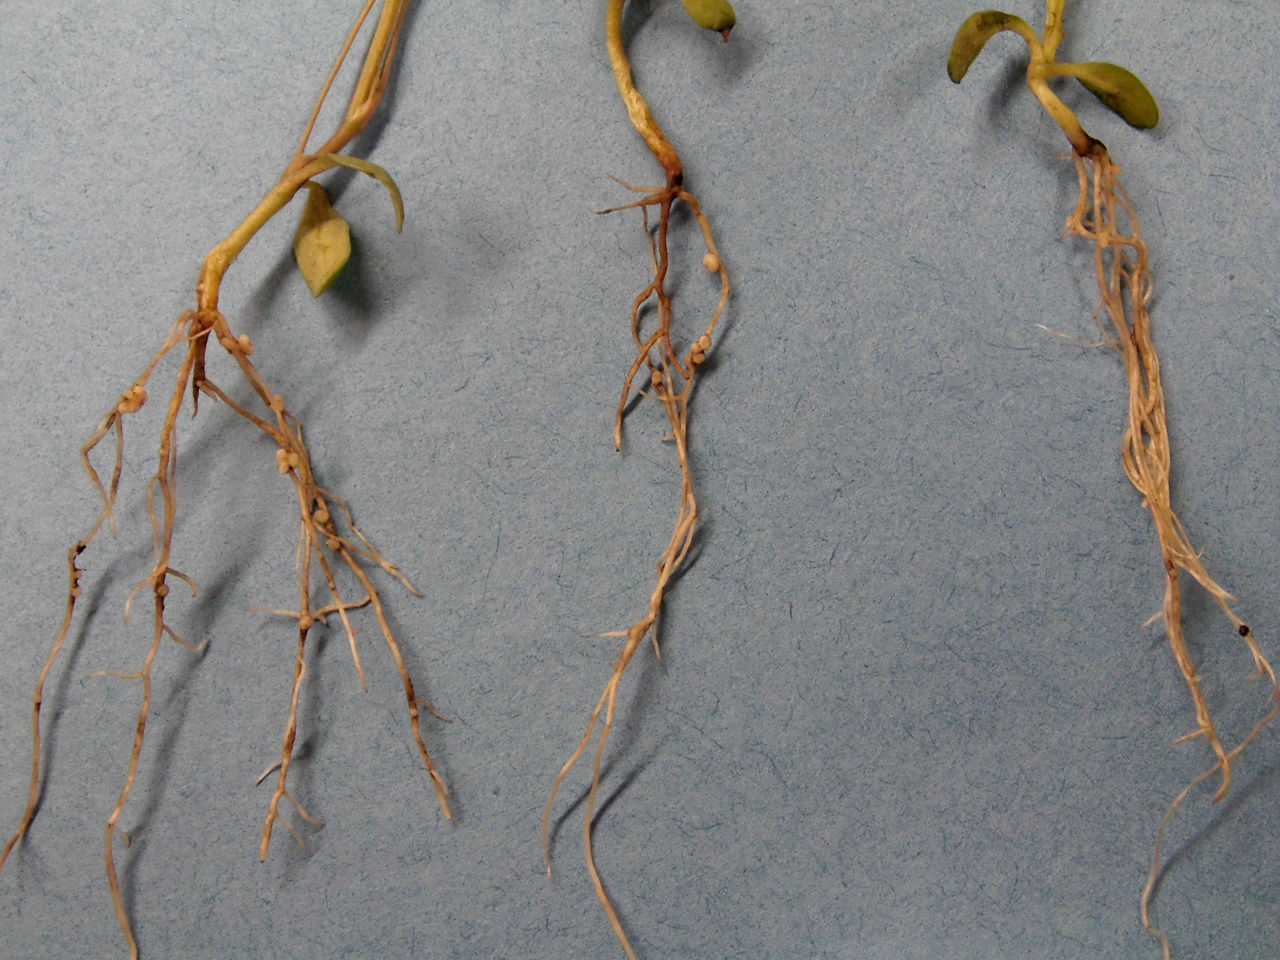 Comparison of healthy (left) and Pythium infected alfalfa roots center and right.